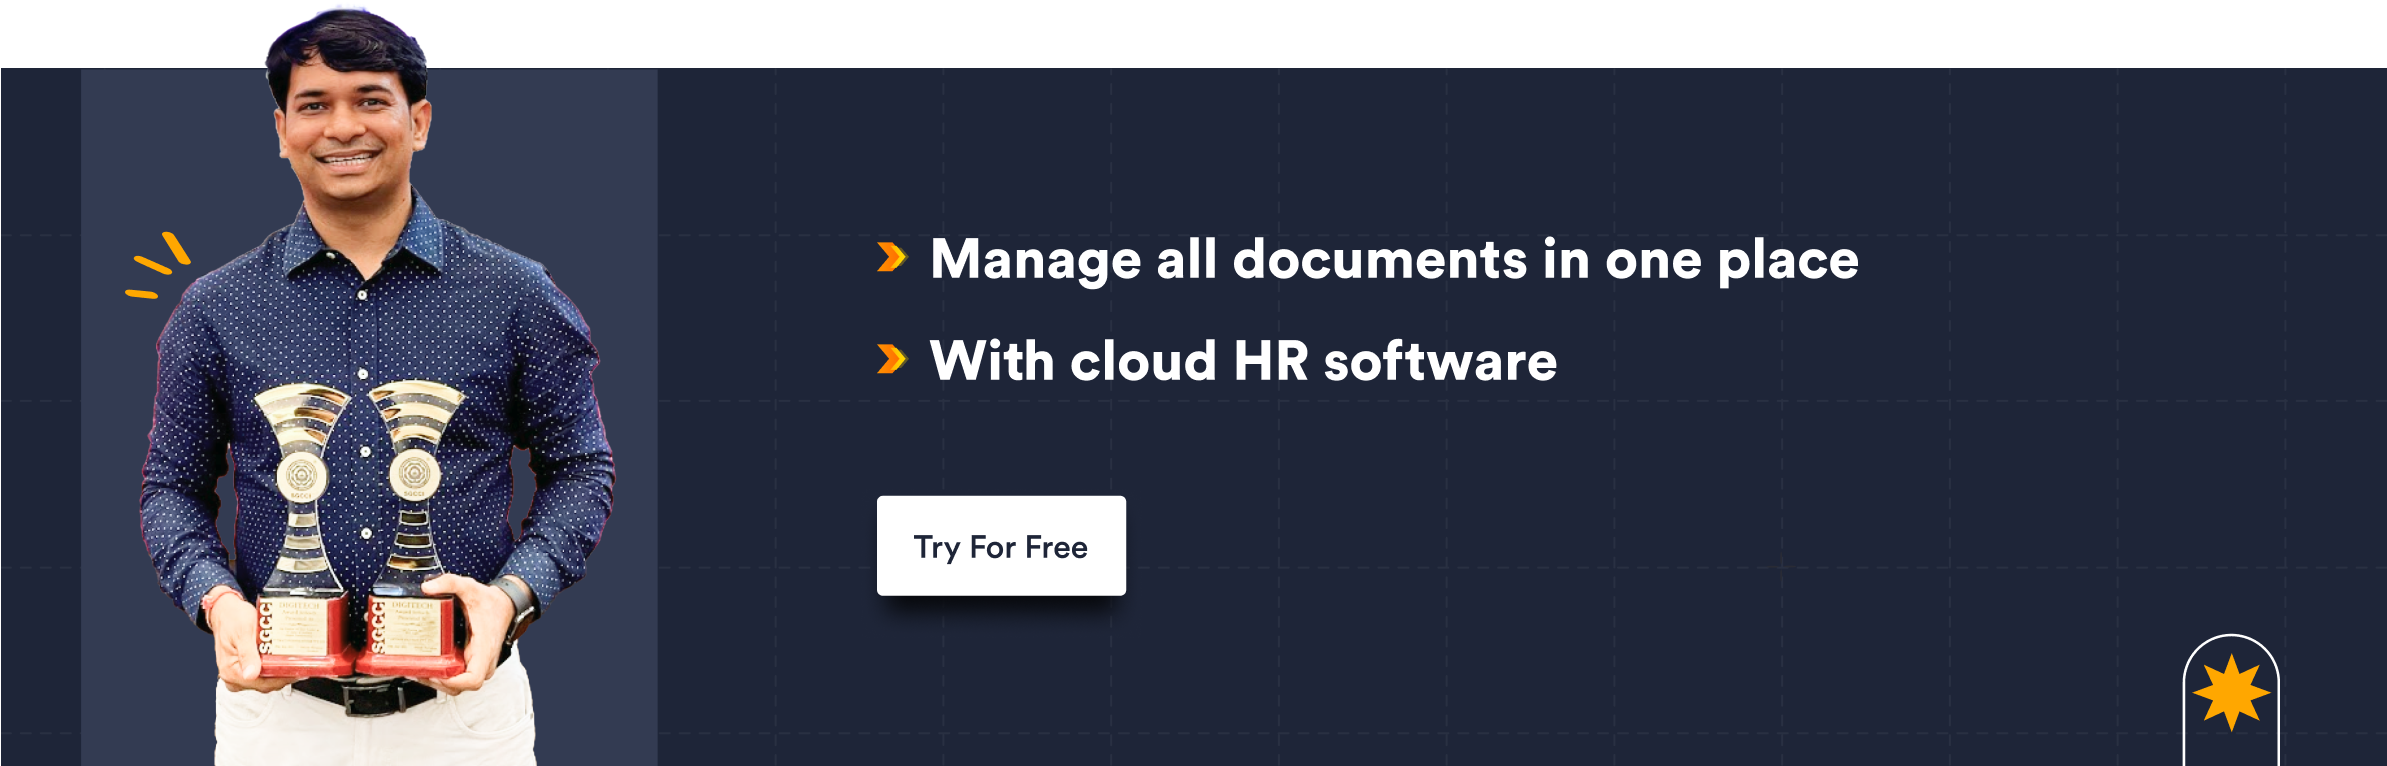 Manage all documents in one place